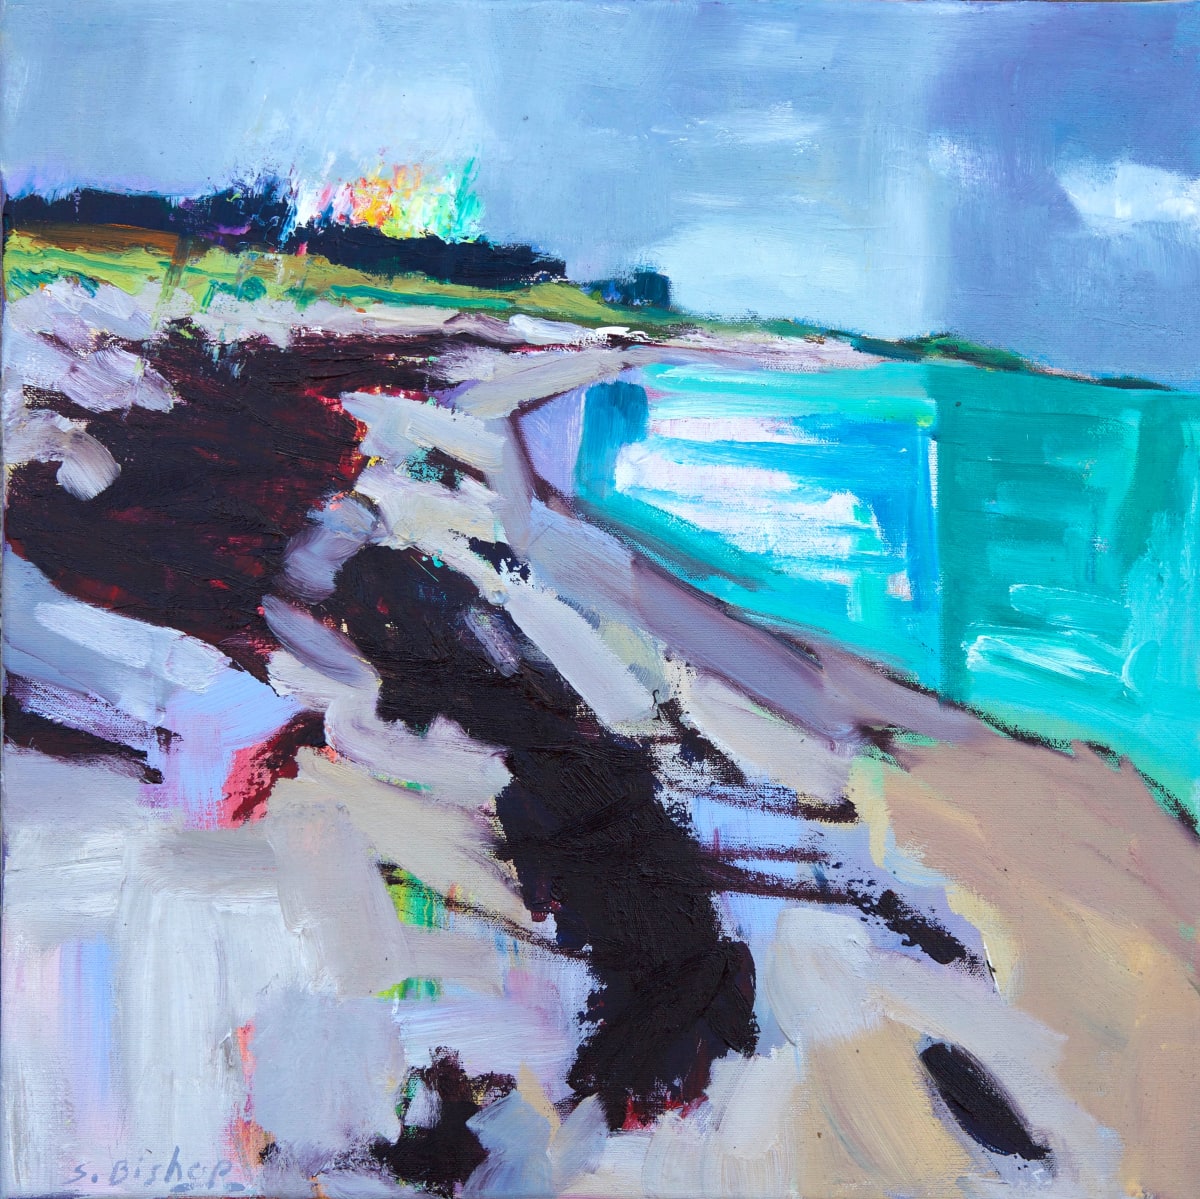 Secret Beach by Stephen Bishop  Image: Available from Gallery Tresco 

https://www.tresco.co.uk/enjoying/gallery-tresco/artists/stephen-bishop